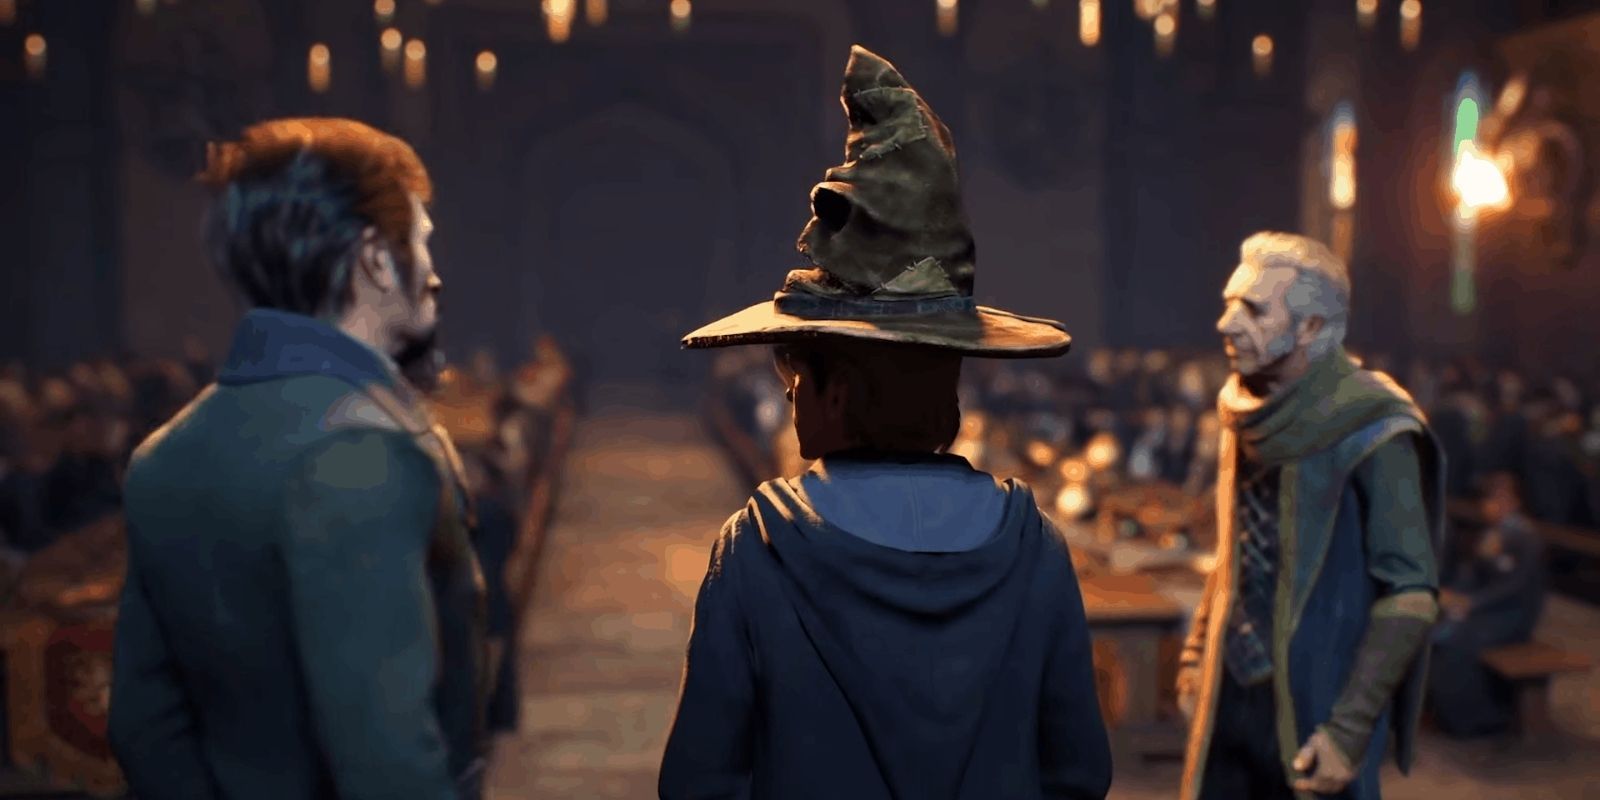 hogwarts-legacy-character-customization-images-details-have-leaked